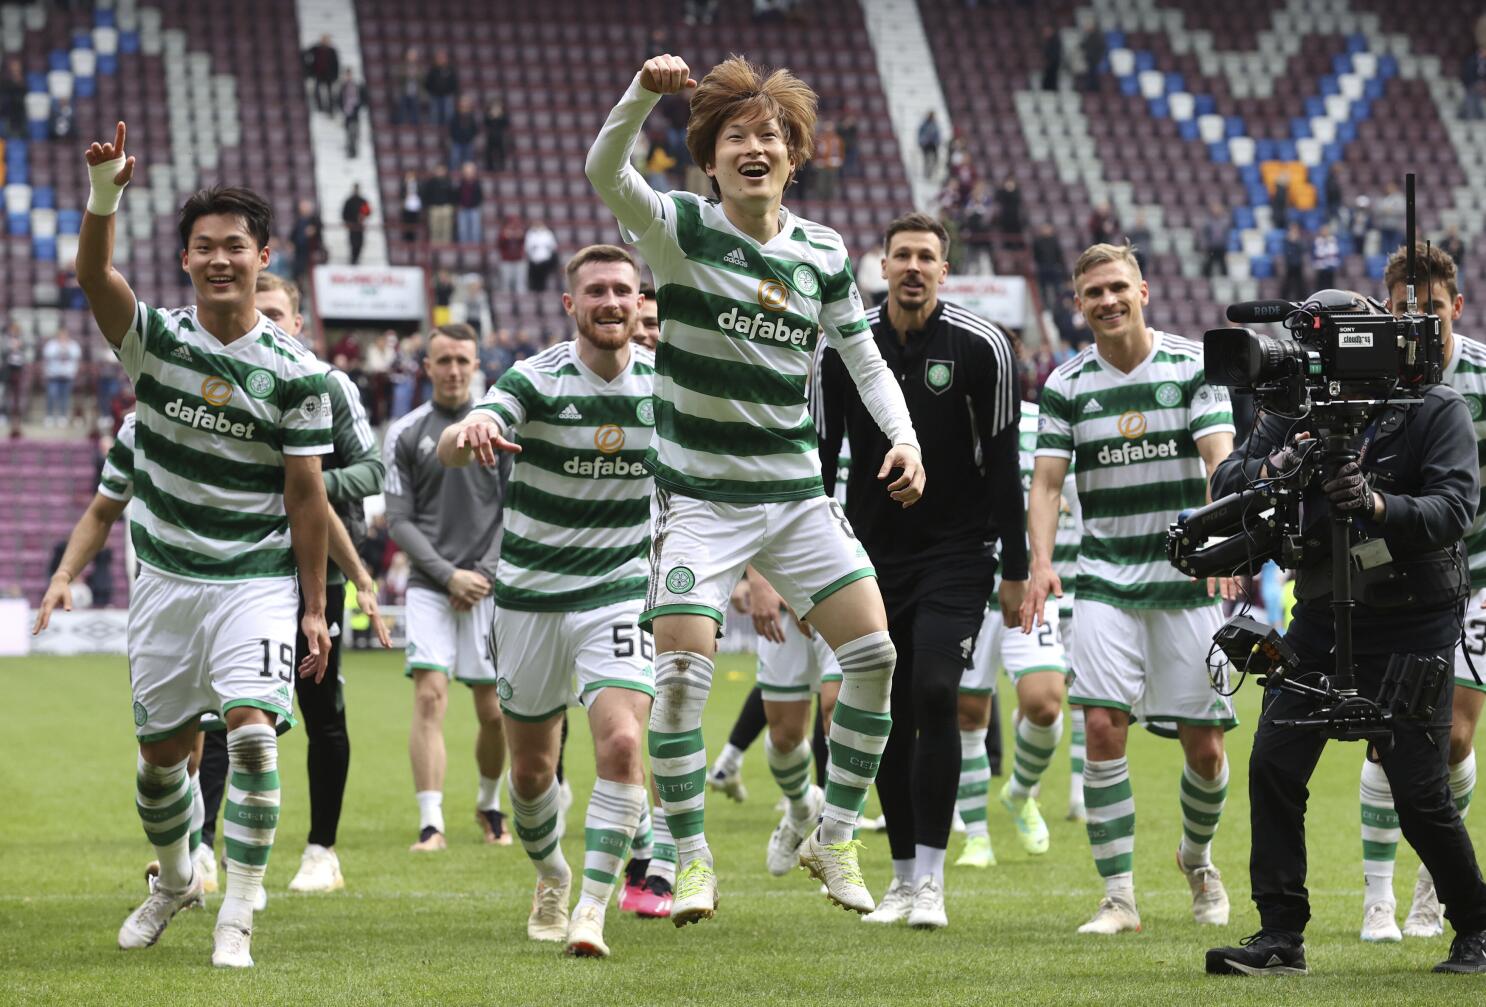 What a week for Celtic and Scottish Football